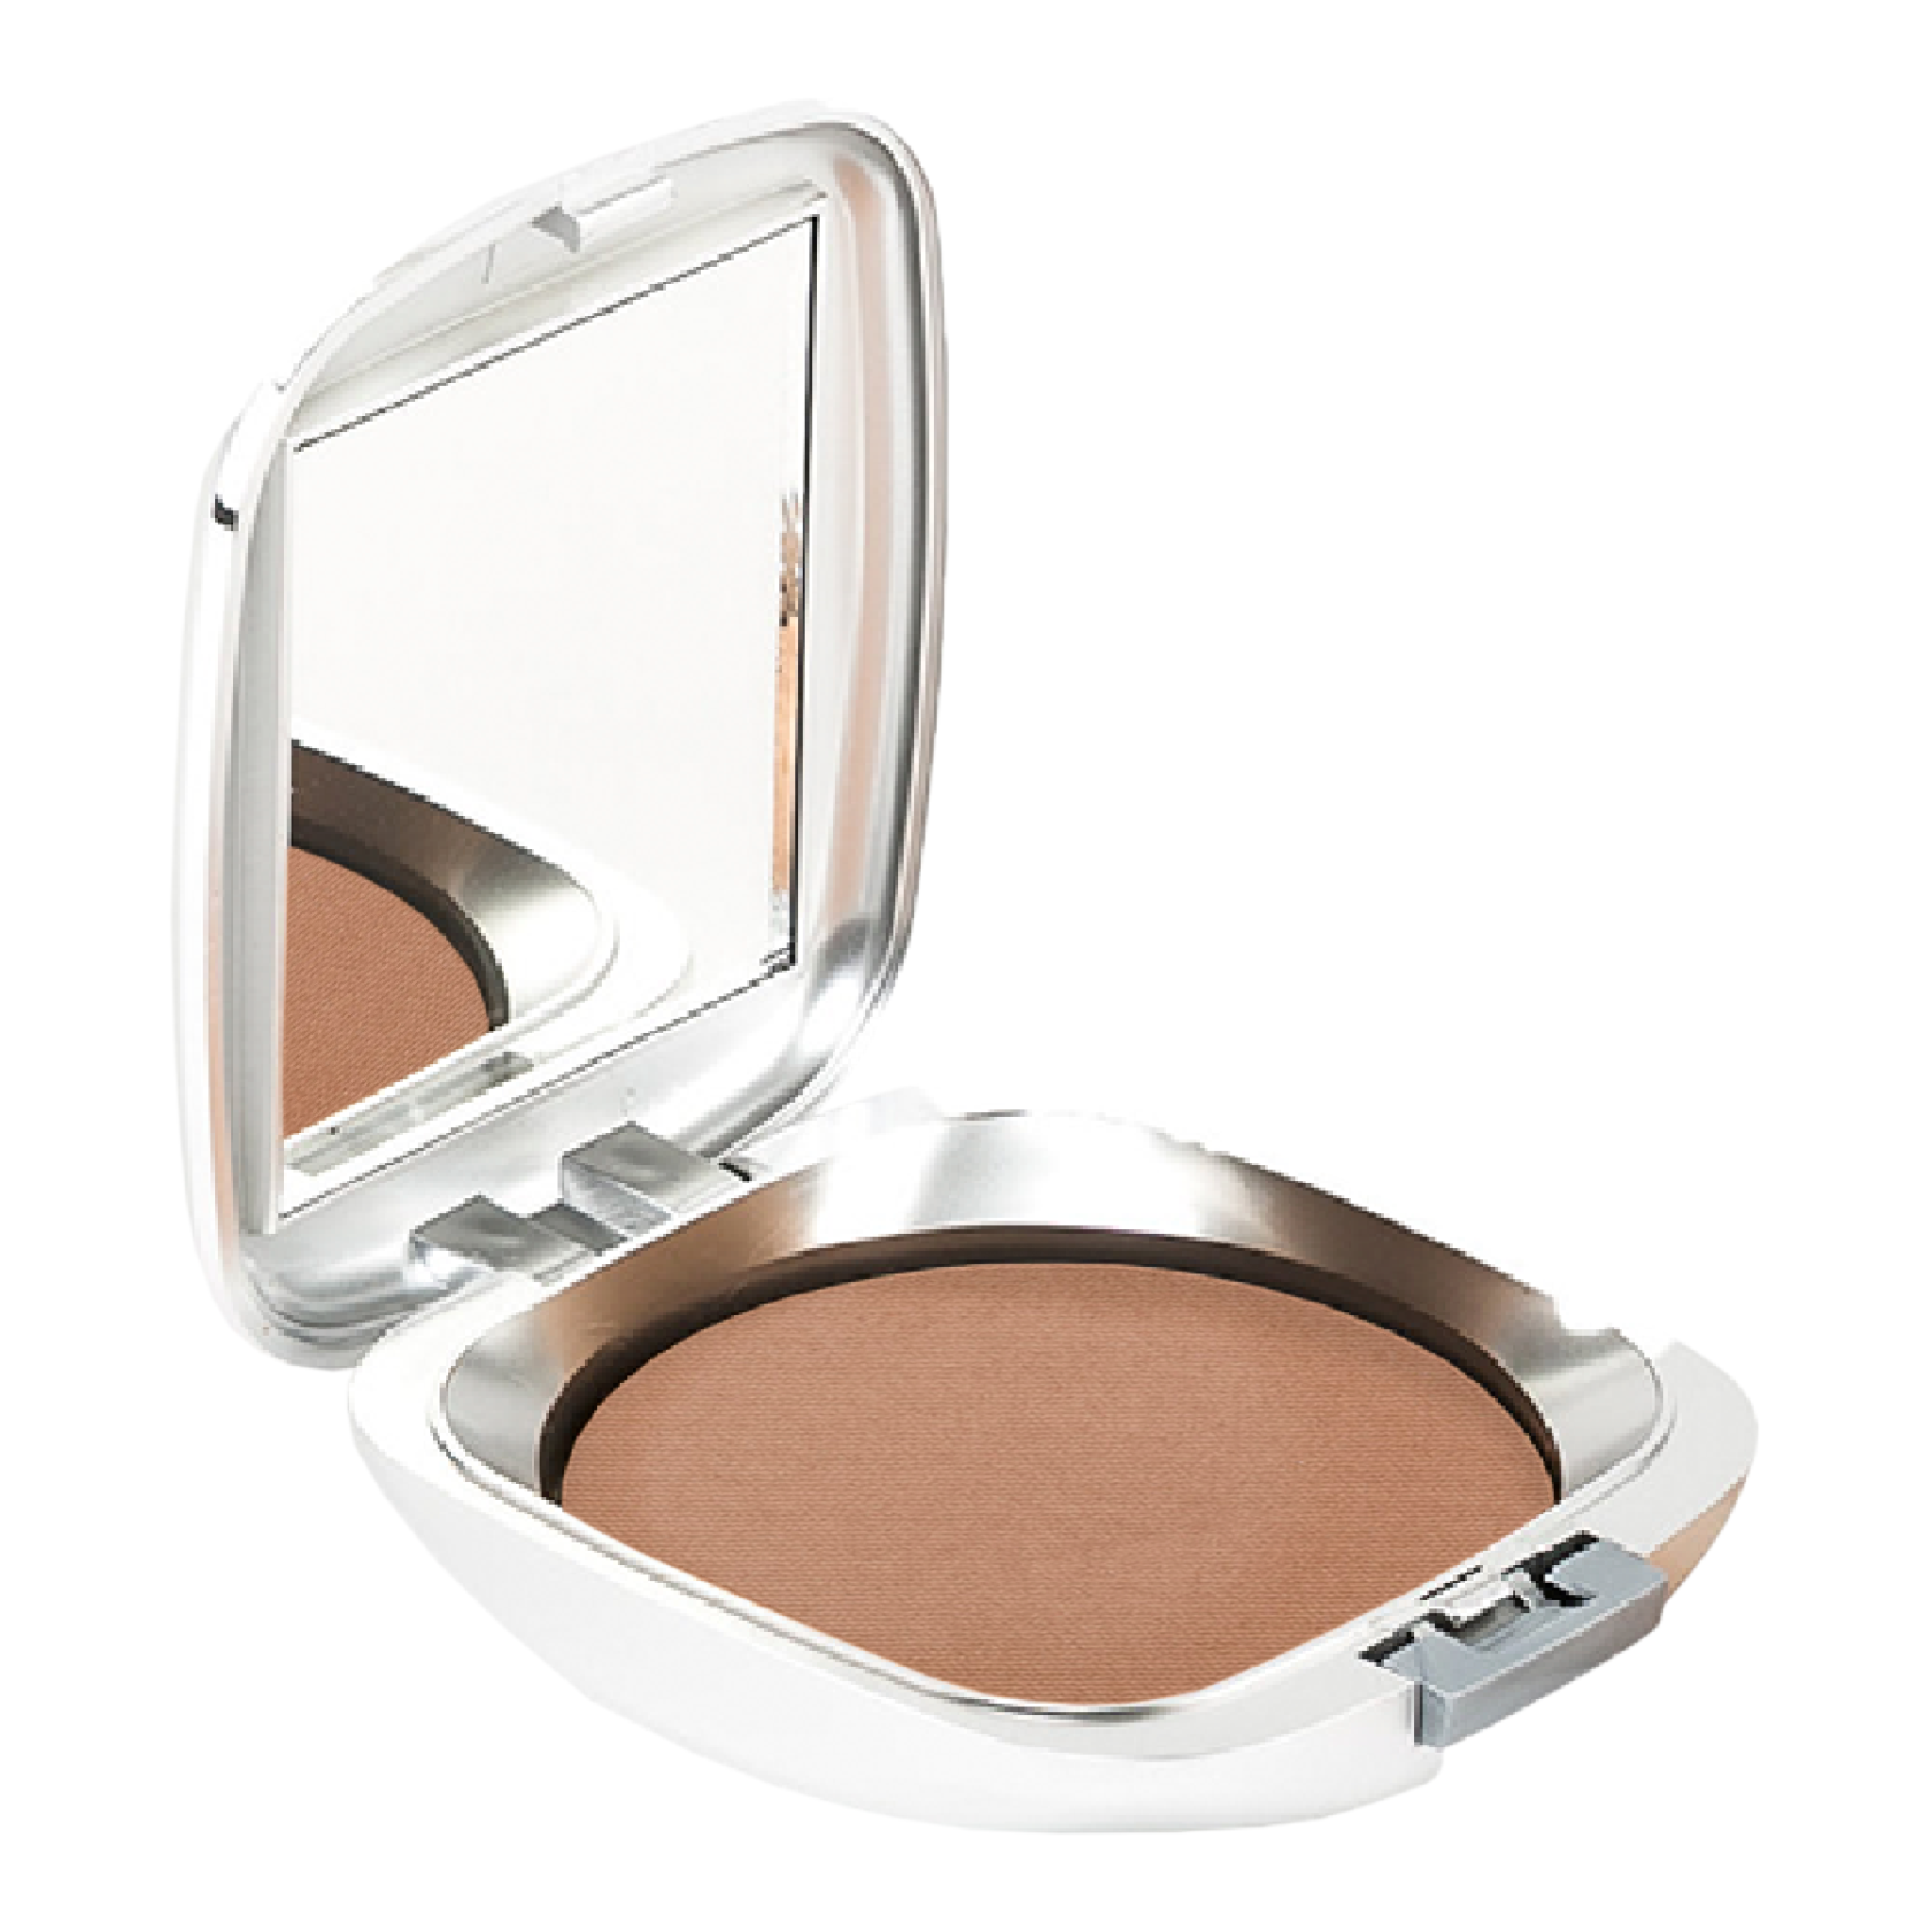 Cose by Tricoci Mineral Highlight Powder